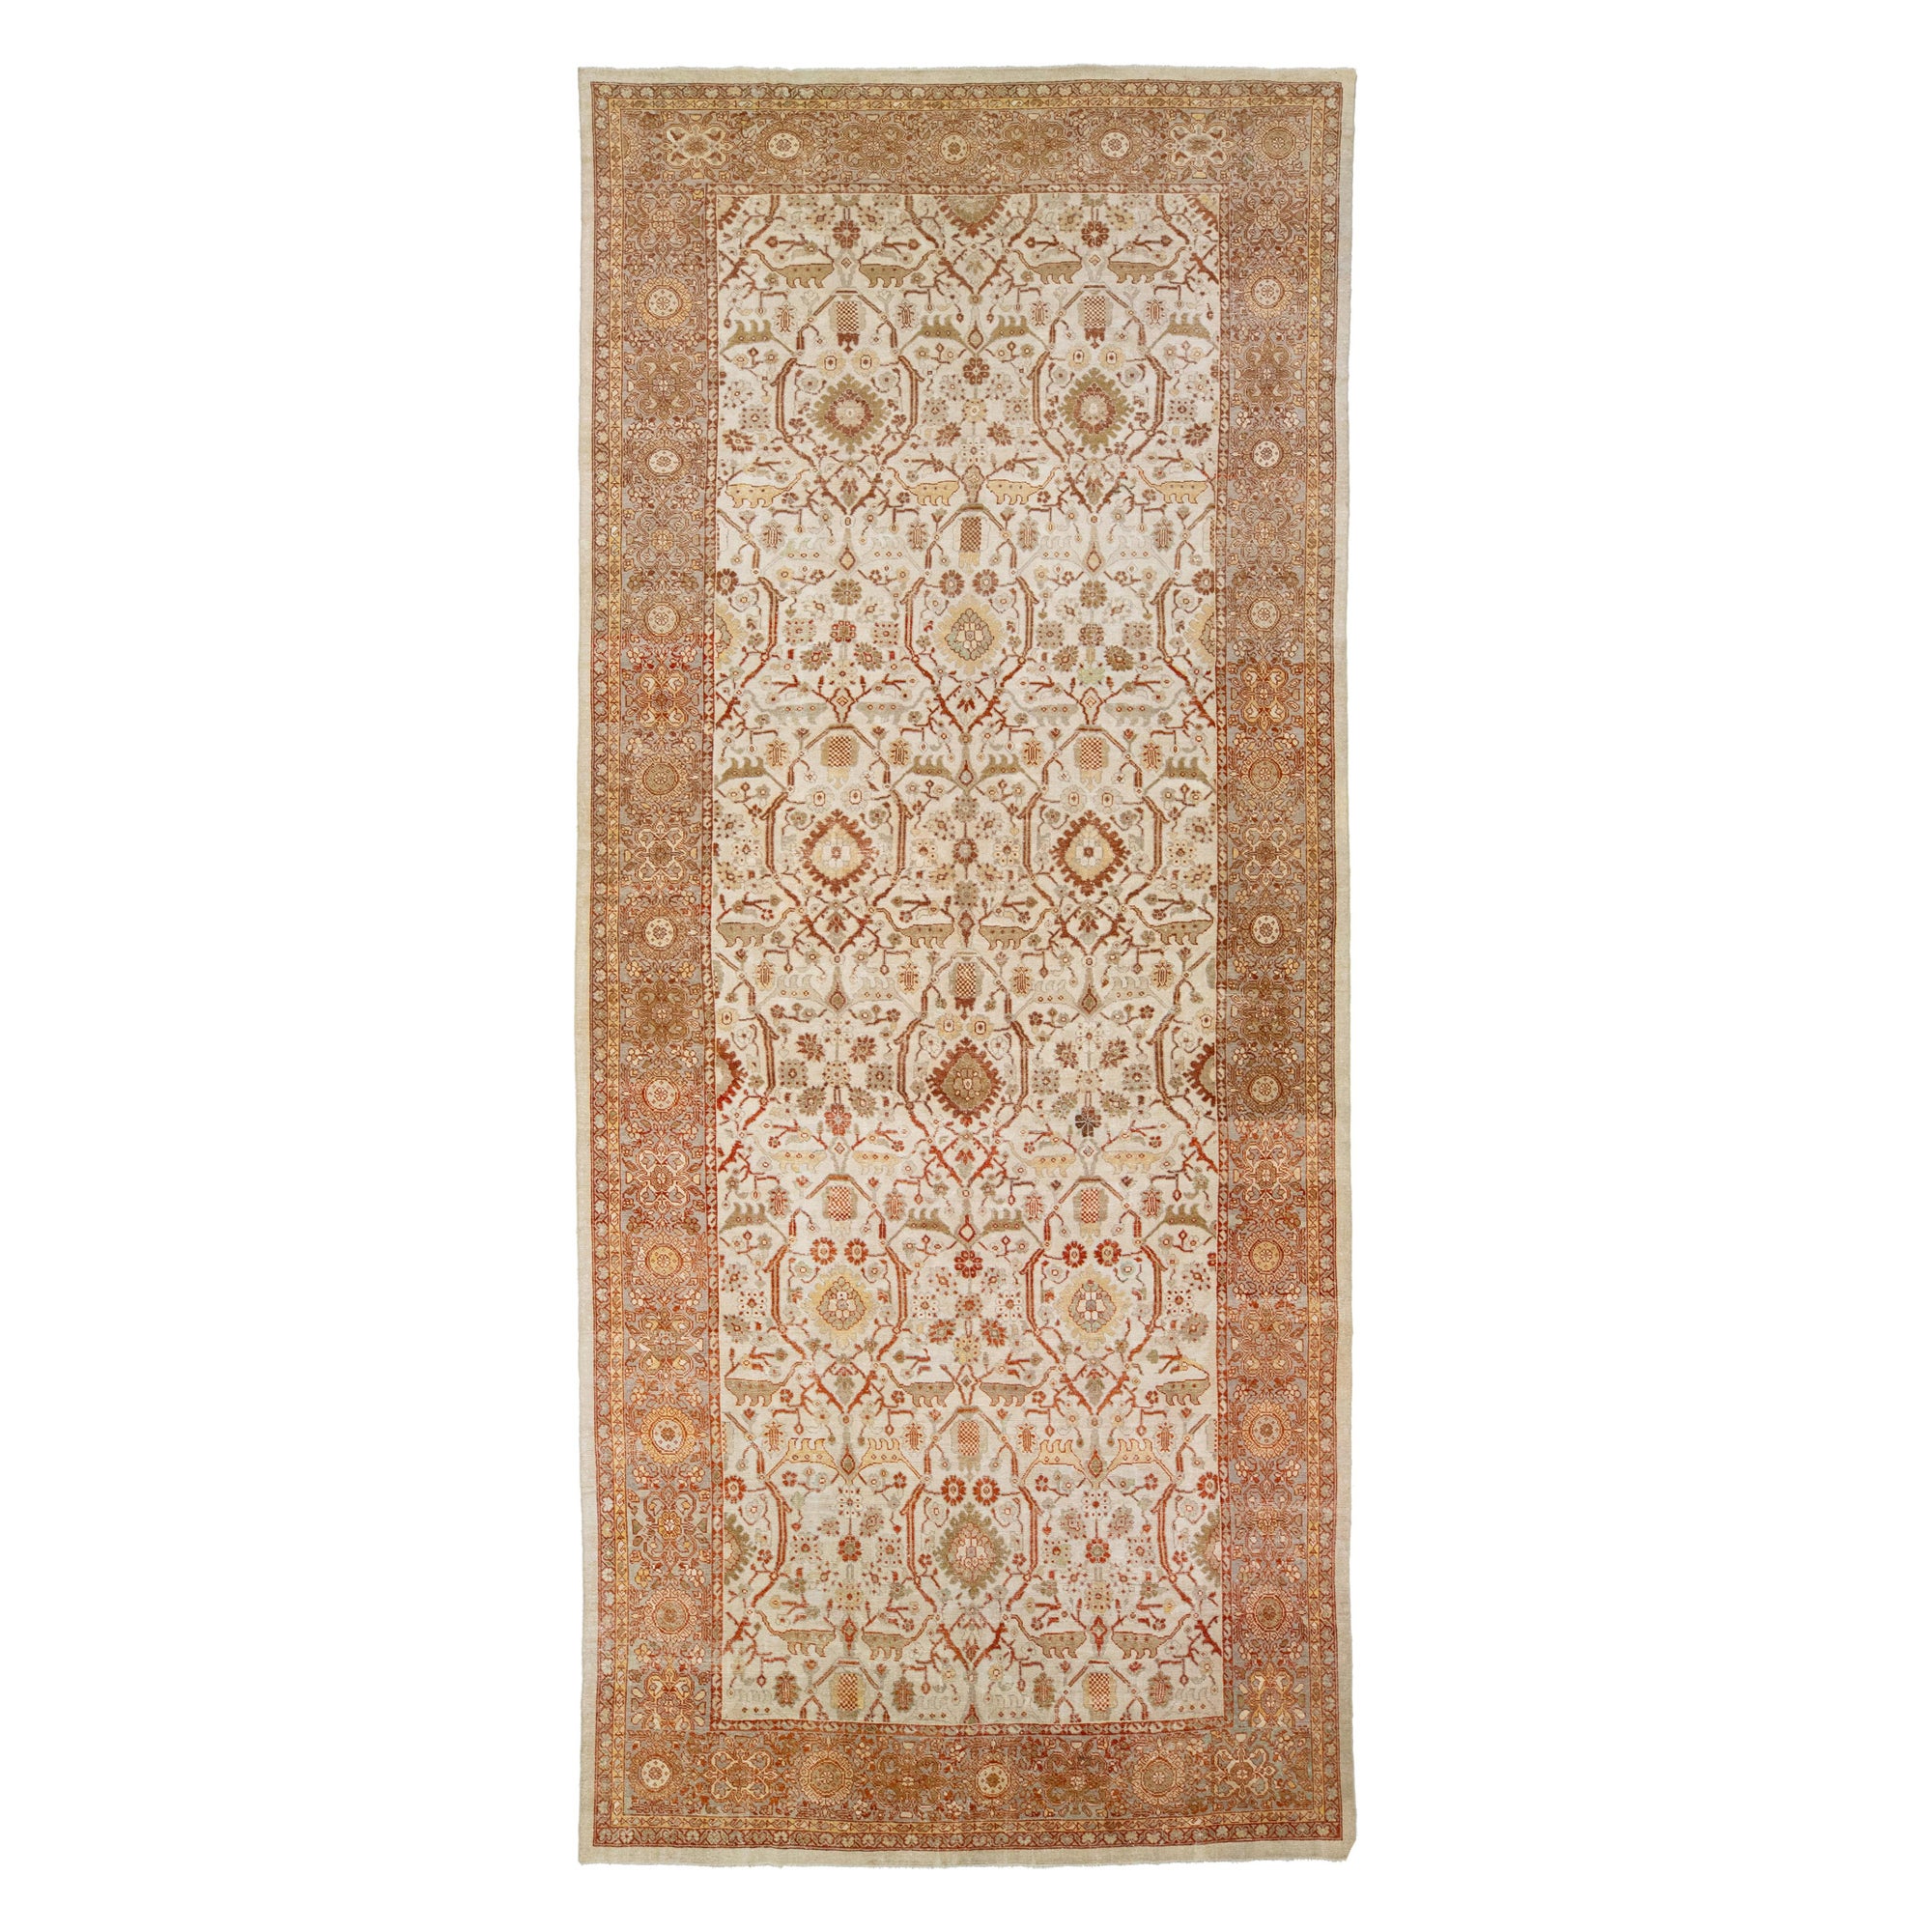 1900s Sultanabad Persian Gallery Wool Rug In Beige and Orange With Floral Motif For Sale